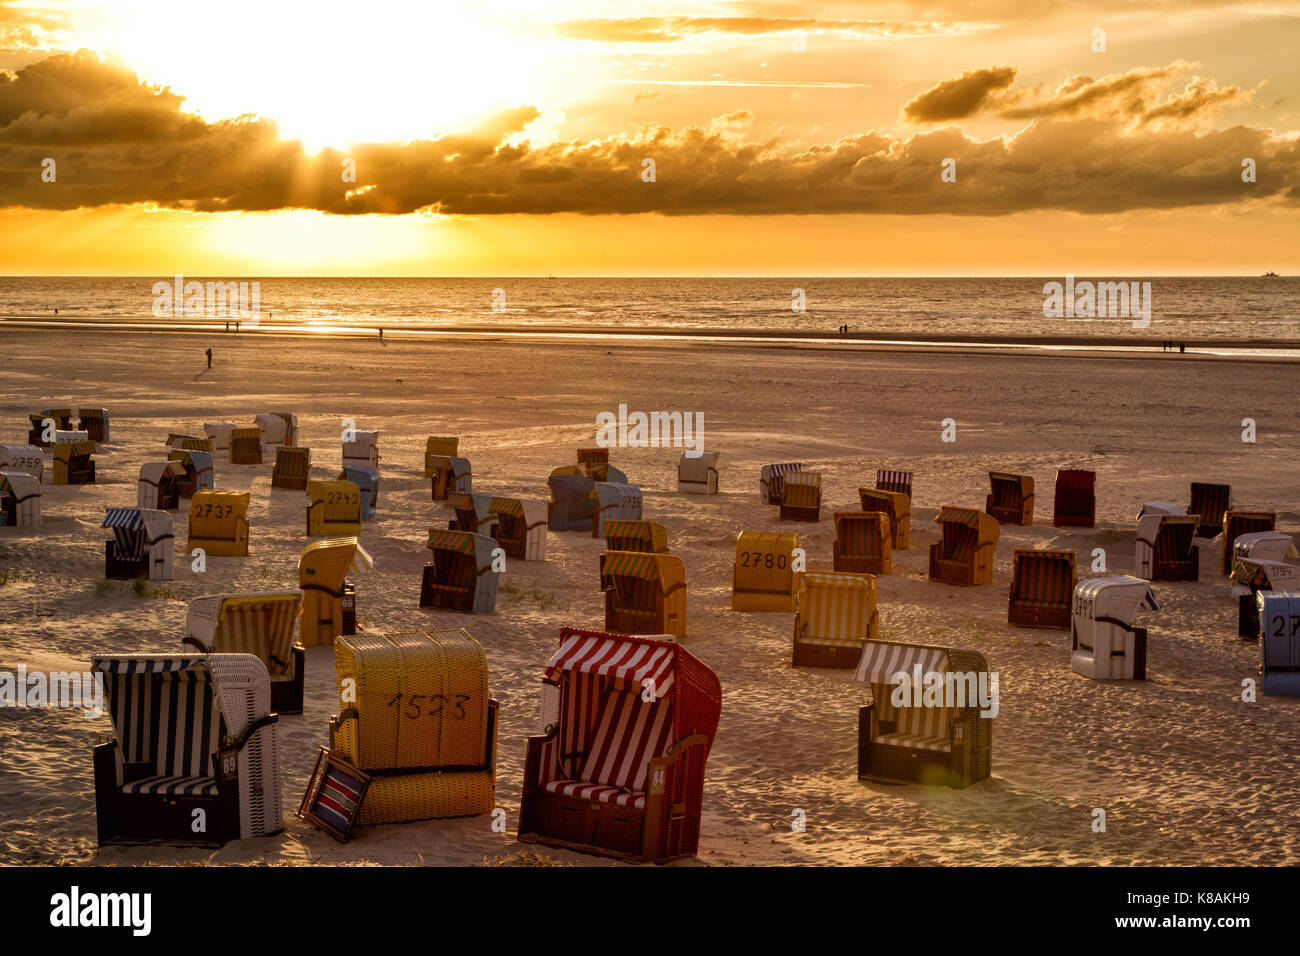 Sunset and dramatic sky over the beach on the north sea island Juist, East Frisia, Germany, Europe. Stock Photo